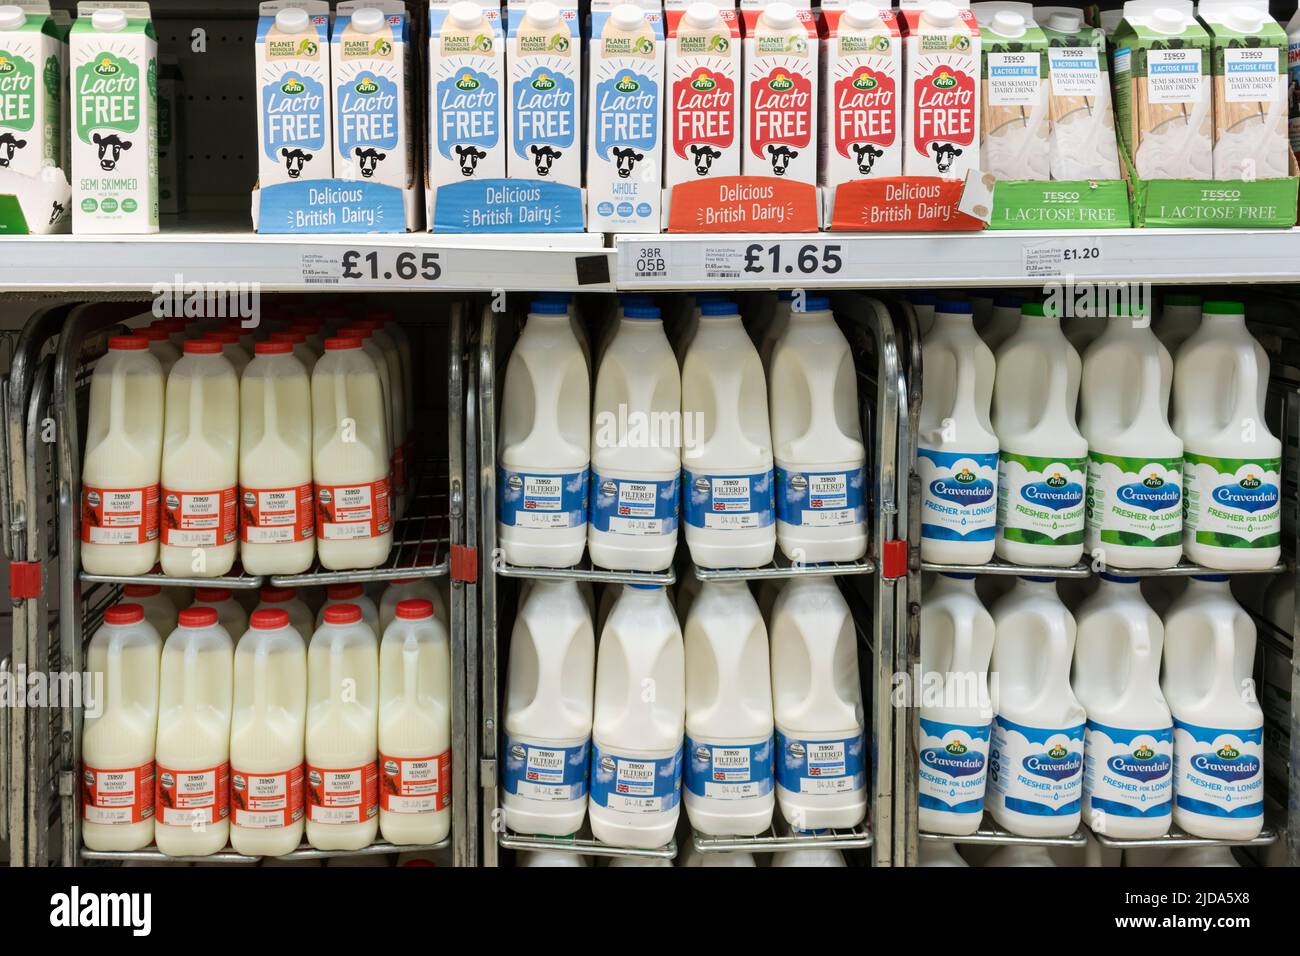 Supermarket shelves with regular dairy milk in plastic containers and lactose free milk in cartons at Tesco, a UK supermarket Stock Photo